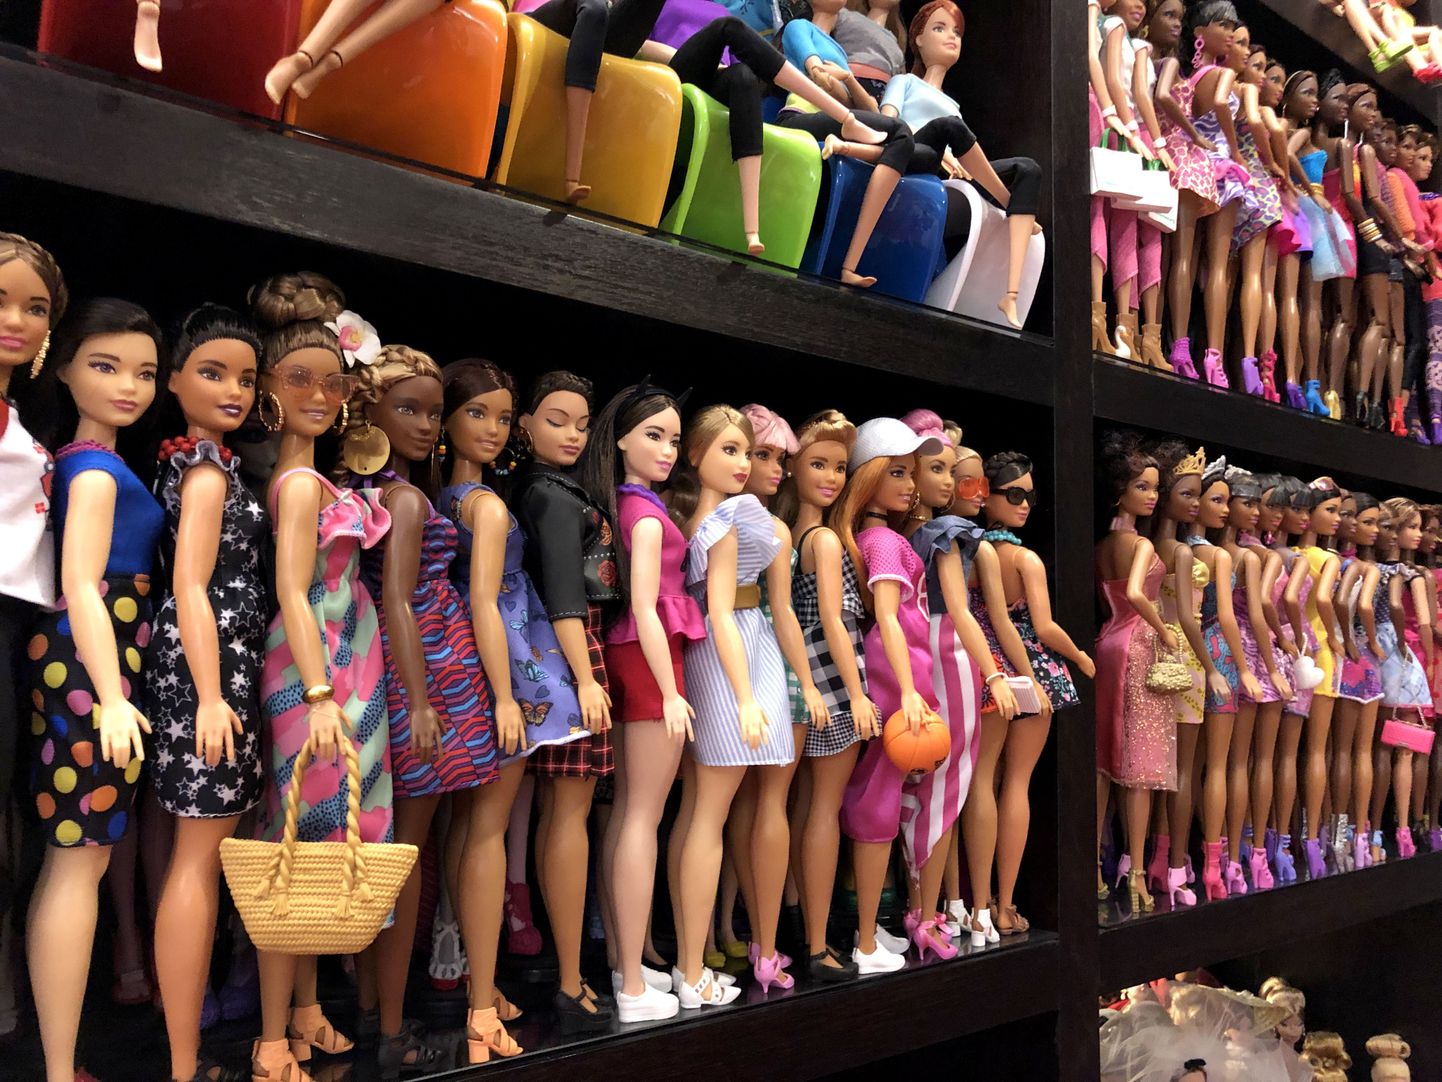 PIC FROM Jian Yang / Caters News - (PICTURED: Jian Yang, 39, from Singapore, has collected 12,000 Barbie dolls over the years) - A Barbie fanatic has revealed hes spent decades amassing a collection of 12,000 dolls worth millions  but admitted his hobby takes a toll on his love life. Since Singaporean Jian Yang, 39, began his love affair with the leggy lady in his tender years, he has assembled an army of 12,000 Barbies and other dolls that fill several rooms of his home.SEE CATERS COPY